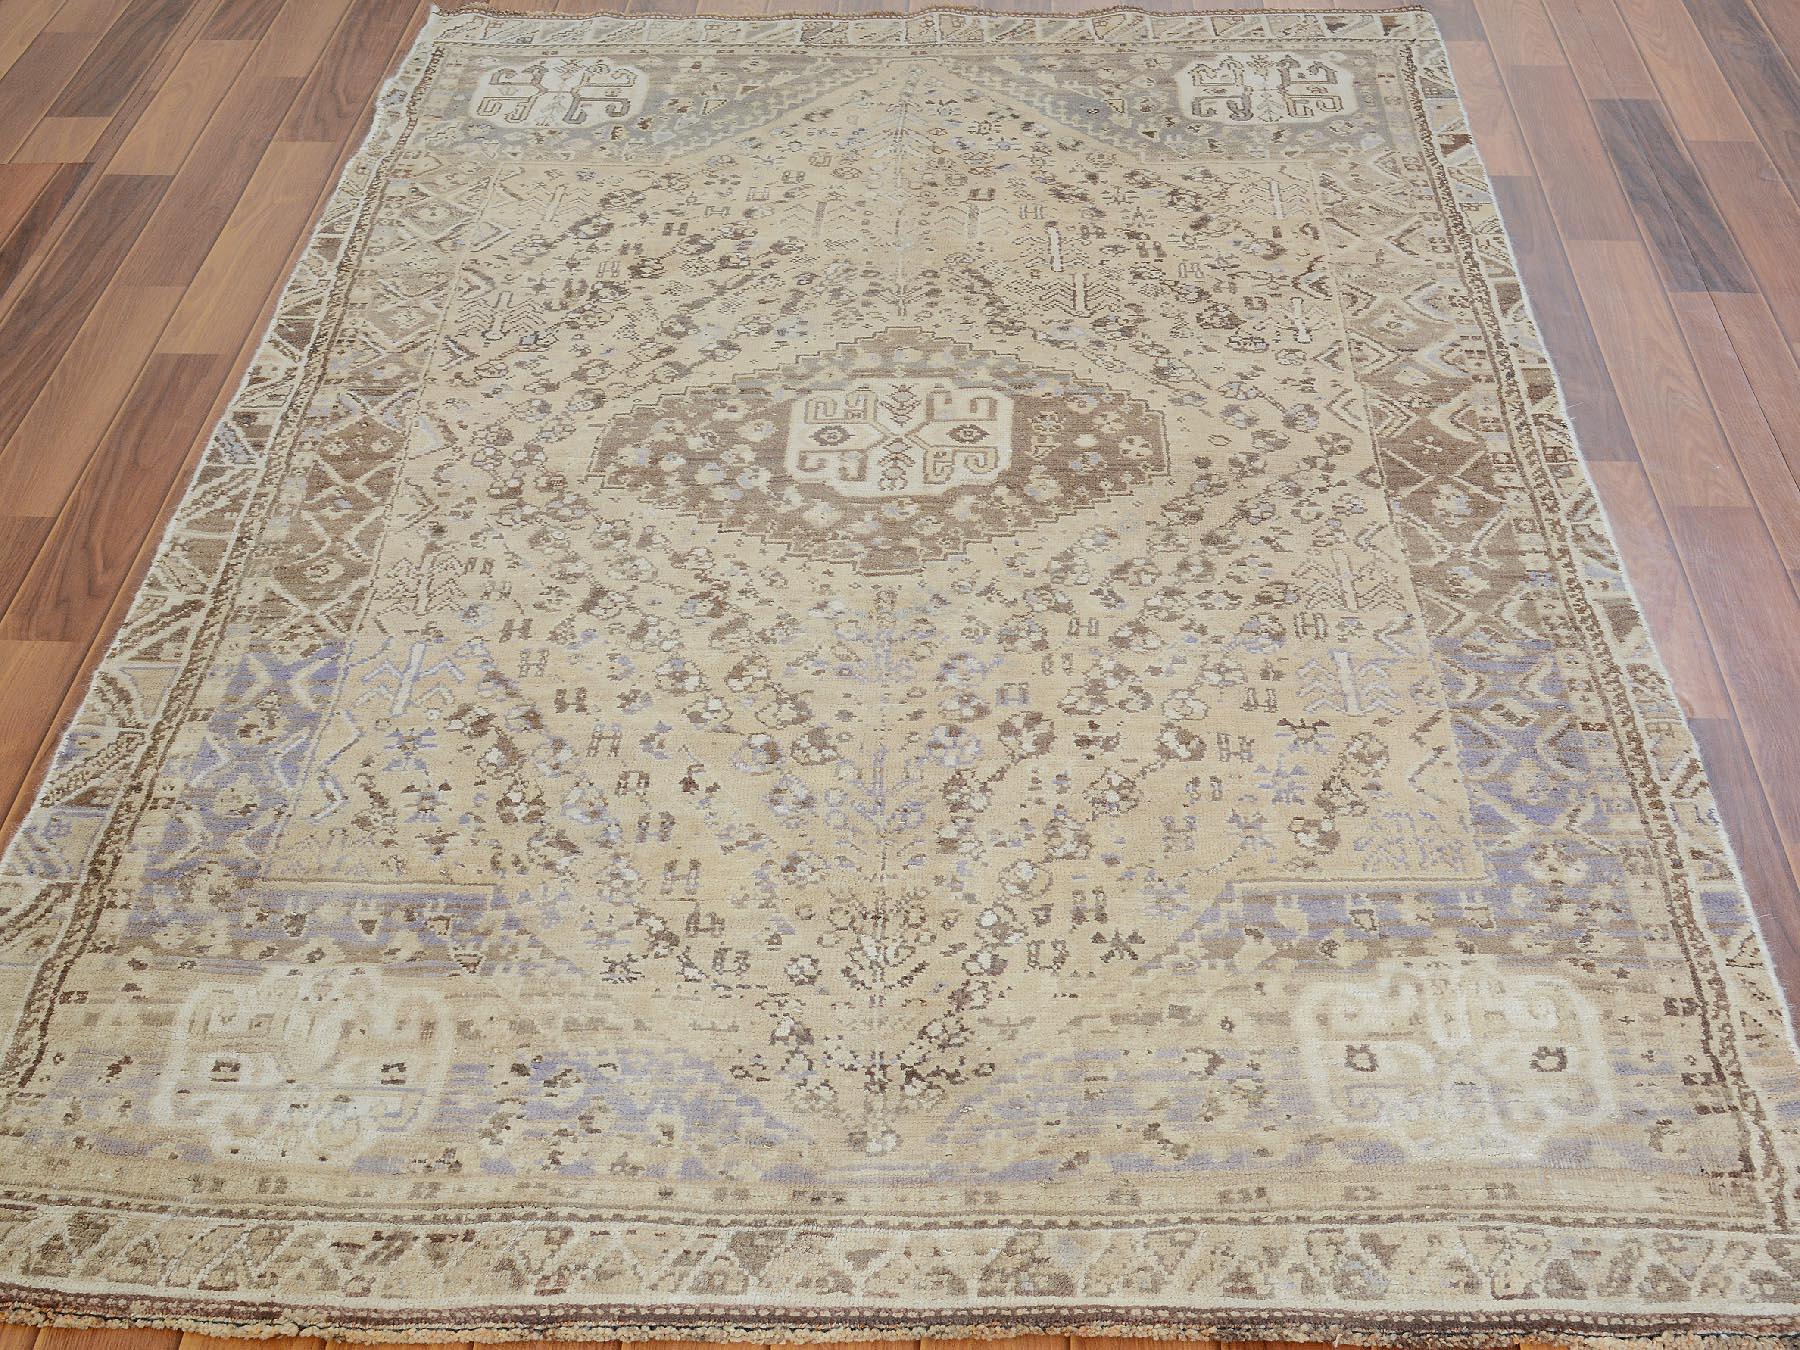 This fabulous hand knotted carpet has been created and designed for extra strength and durability. This rug has been handcrafted for weeks in the traditional method that is used to make Rugs. This is truly a one-of-kind piece. 

Exact rug size in